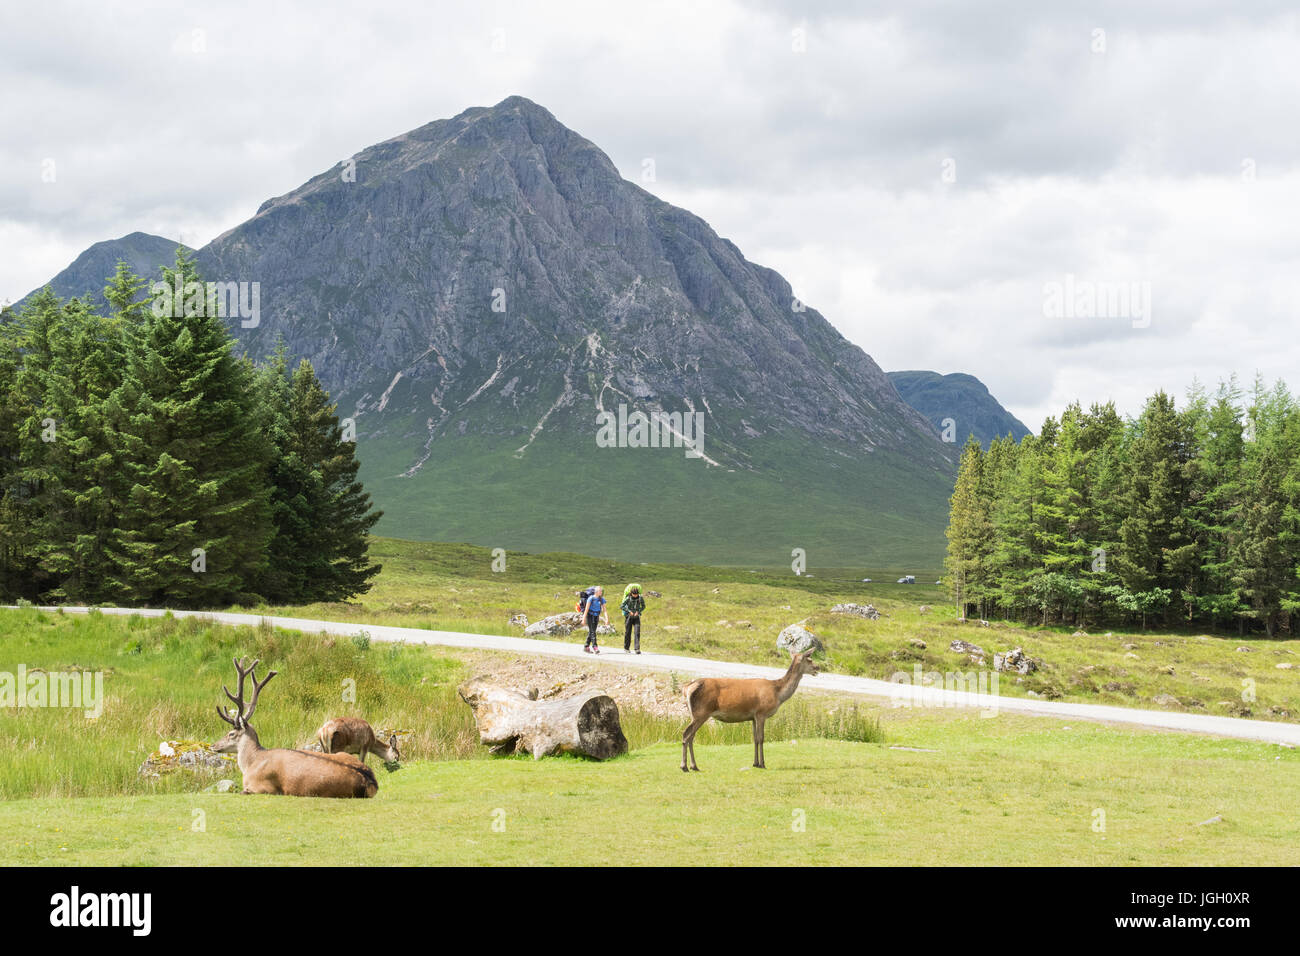 The Scottish Highlands - West Highland Way walkers and red deer beneath the peak of Buachaille Etive Mor at Kings House Hotel, Glencoe, Scotland, UK Stock Photo